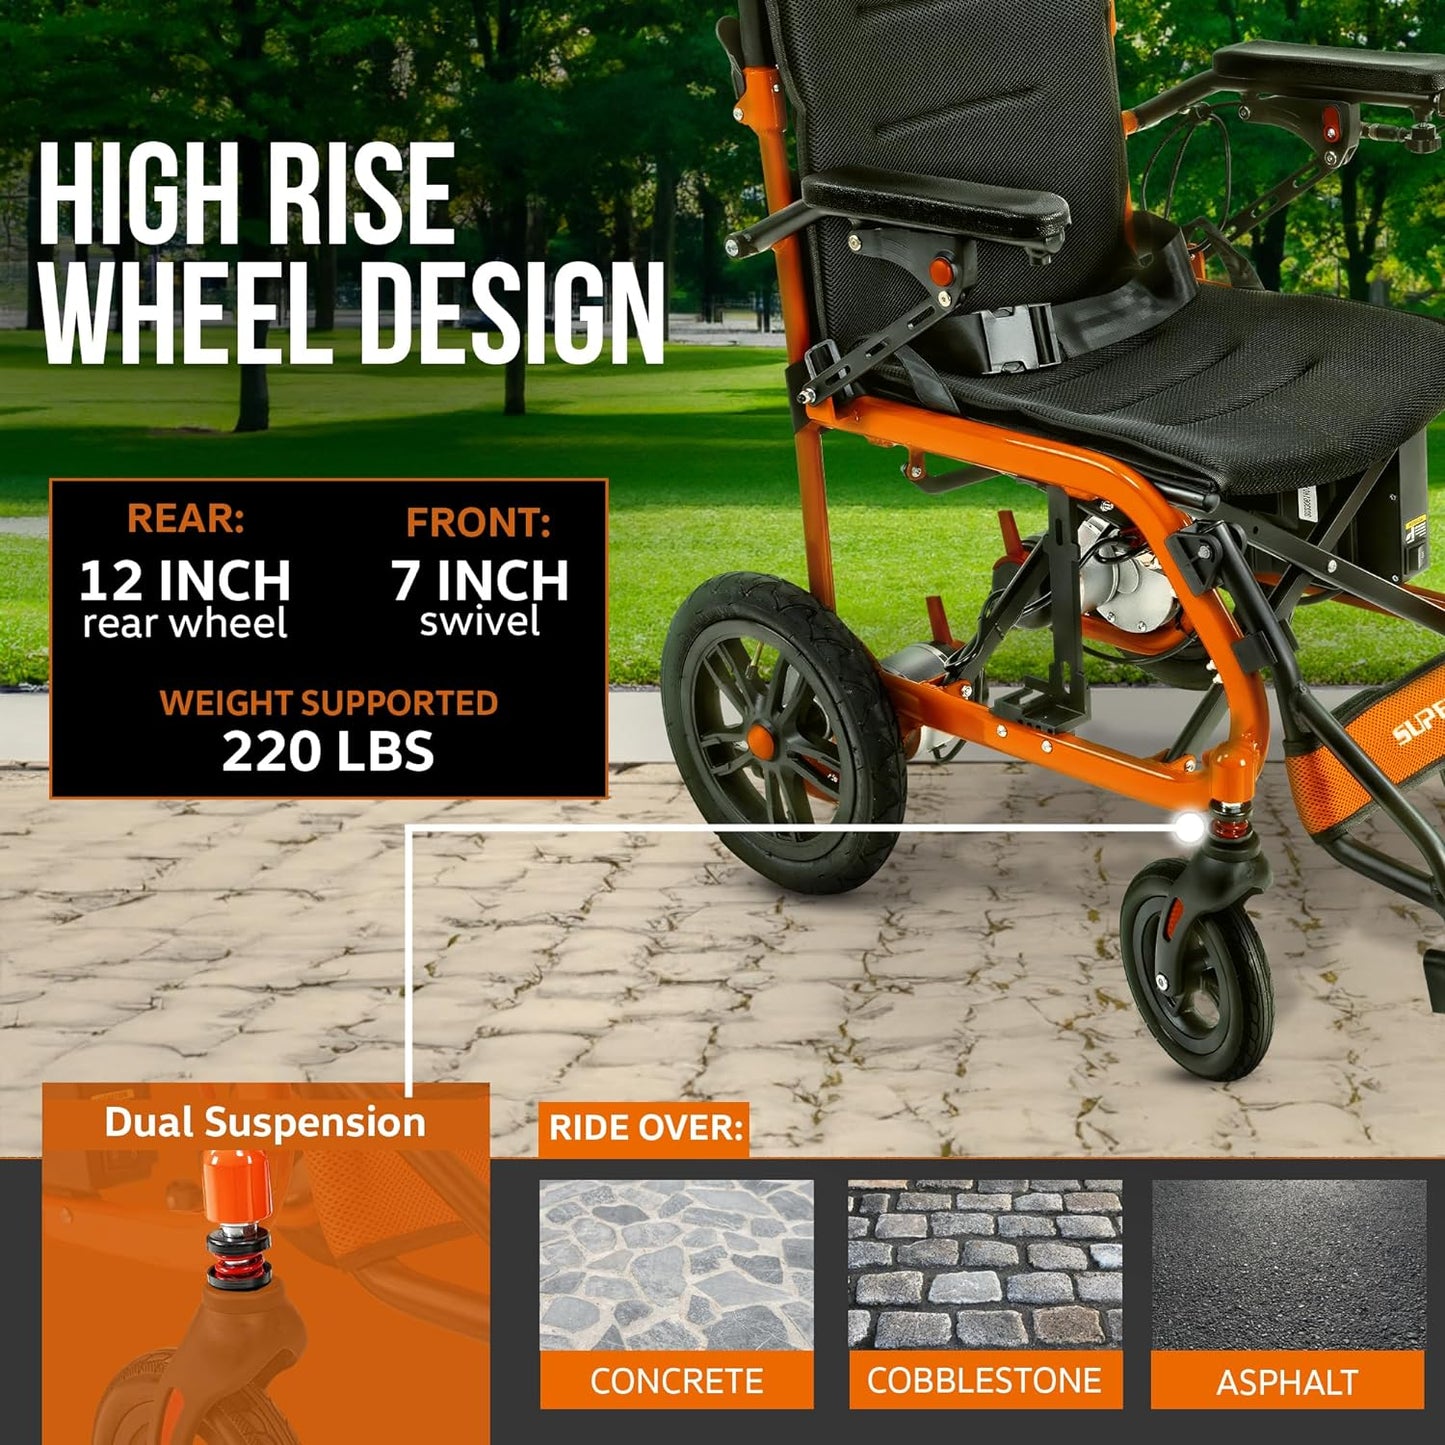 SuperHandy Electric Wheelchair Lightweight Aluminum - Foldable, Powerful 250W Brushless Motors, Dual Mode, 3.7MPH Max Speed, 9 Degree Max Slope - Hand Controls & Electromagnetic Braking